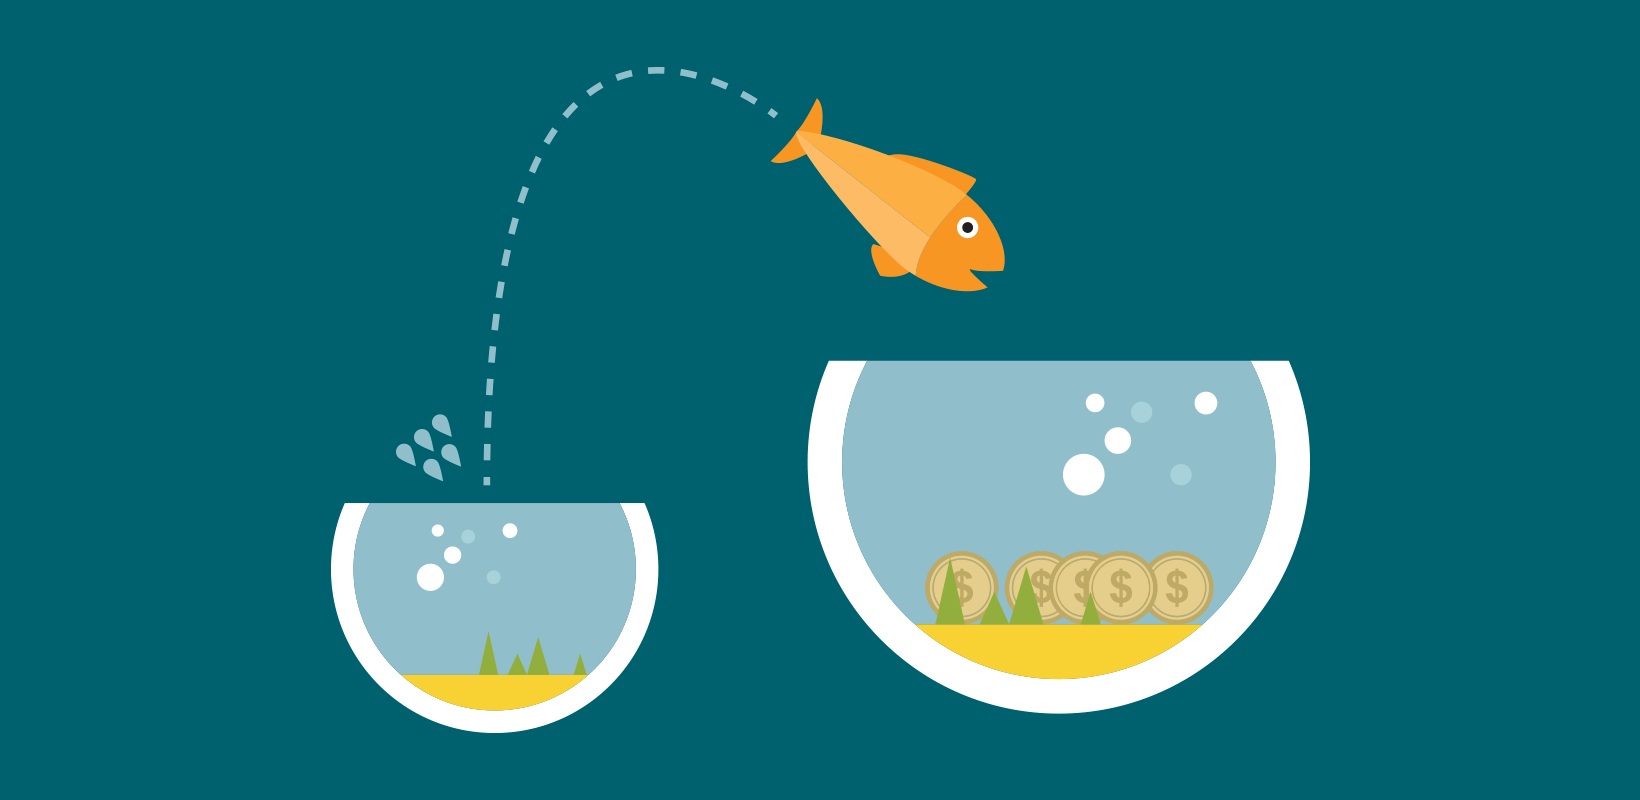 How to optimize a nonprofit website - image of a fish jumping frmo a small bowl into a bigger, better bowl